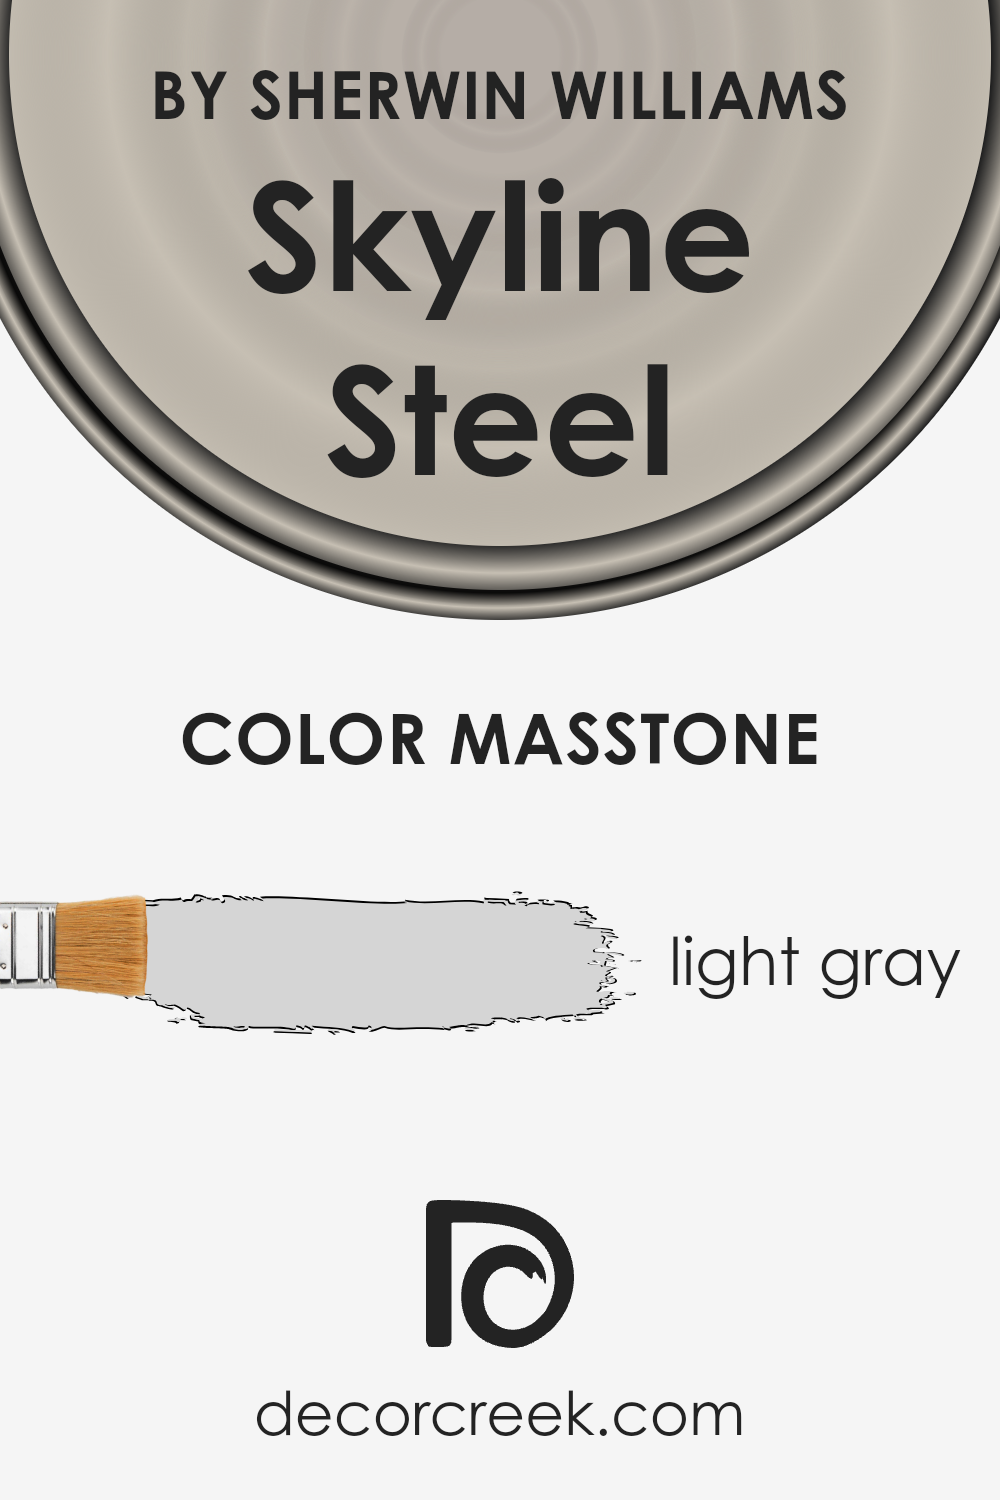 what_is_the_masstone_of_skyline_steel_sw_1015